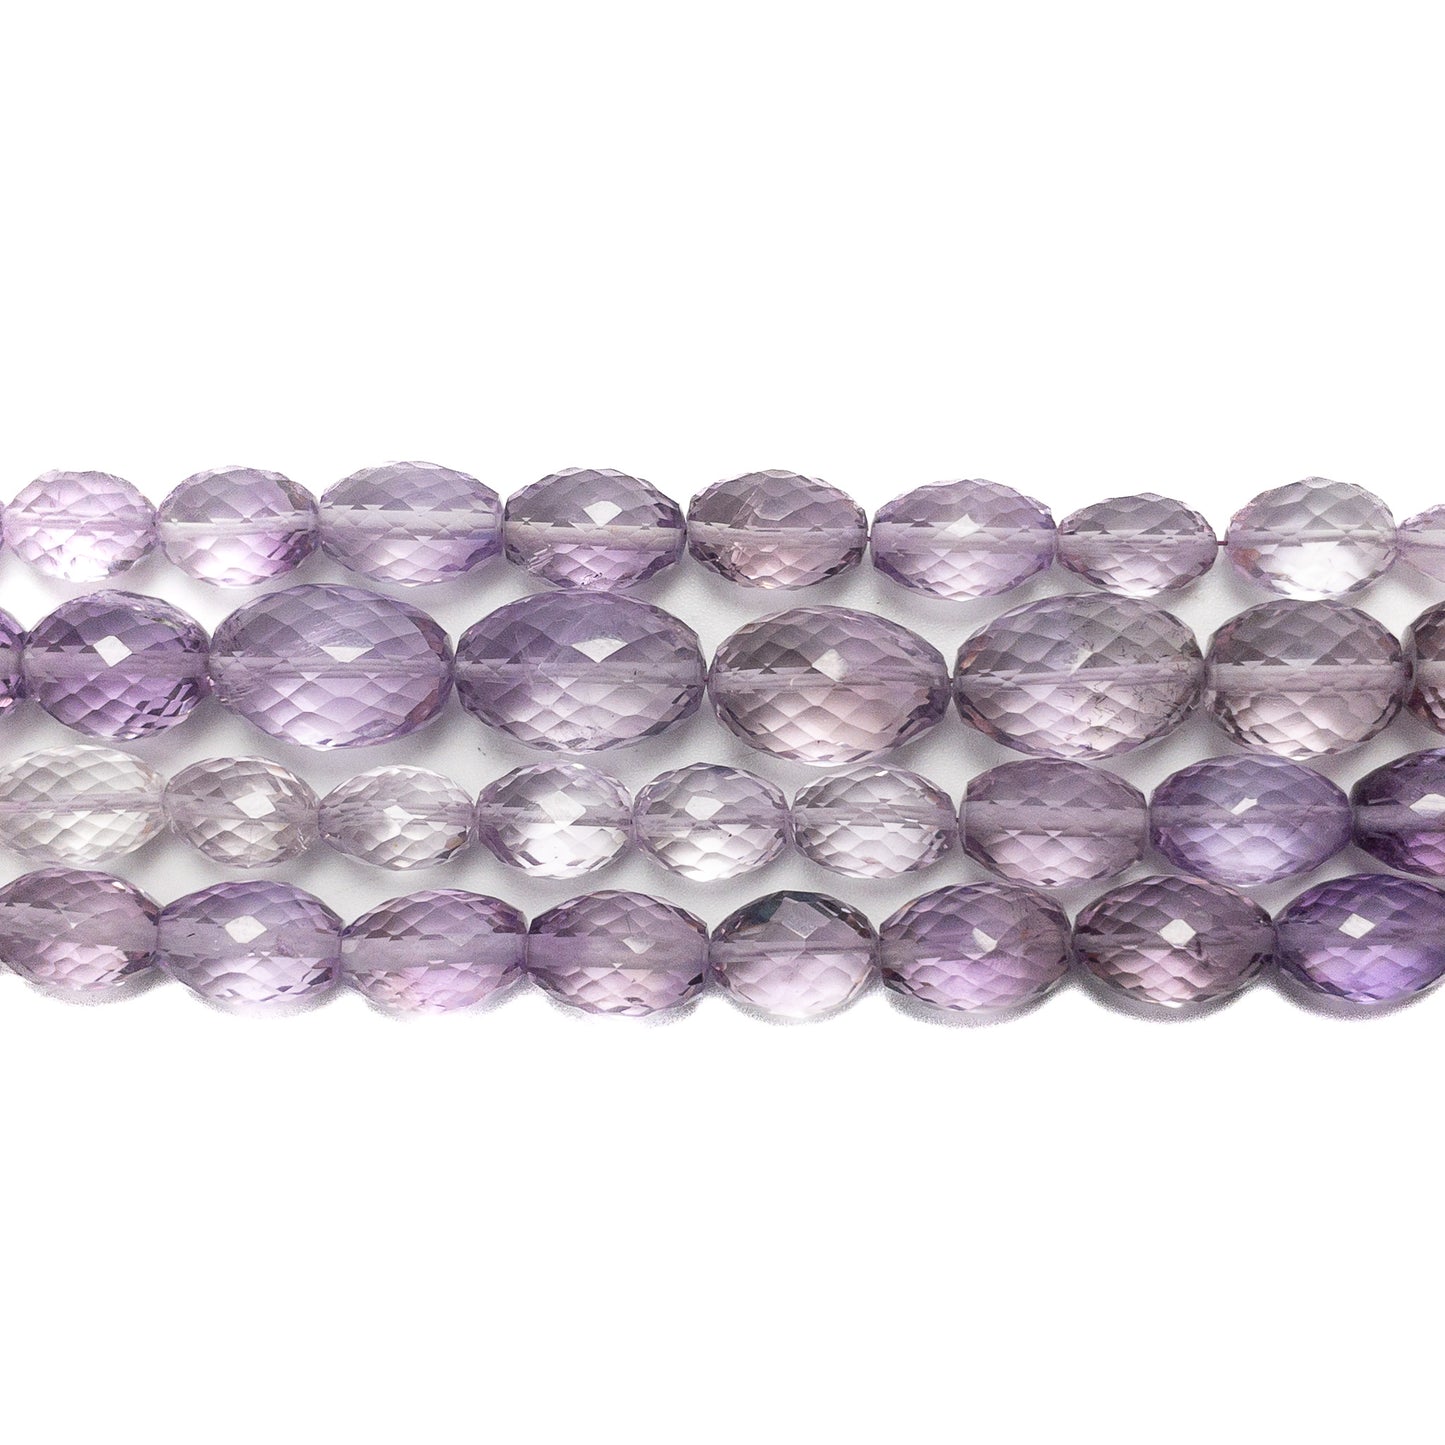 Amethyst 8x12mm Faceted Oval Bead - 8" Strand